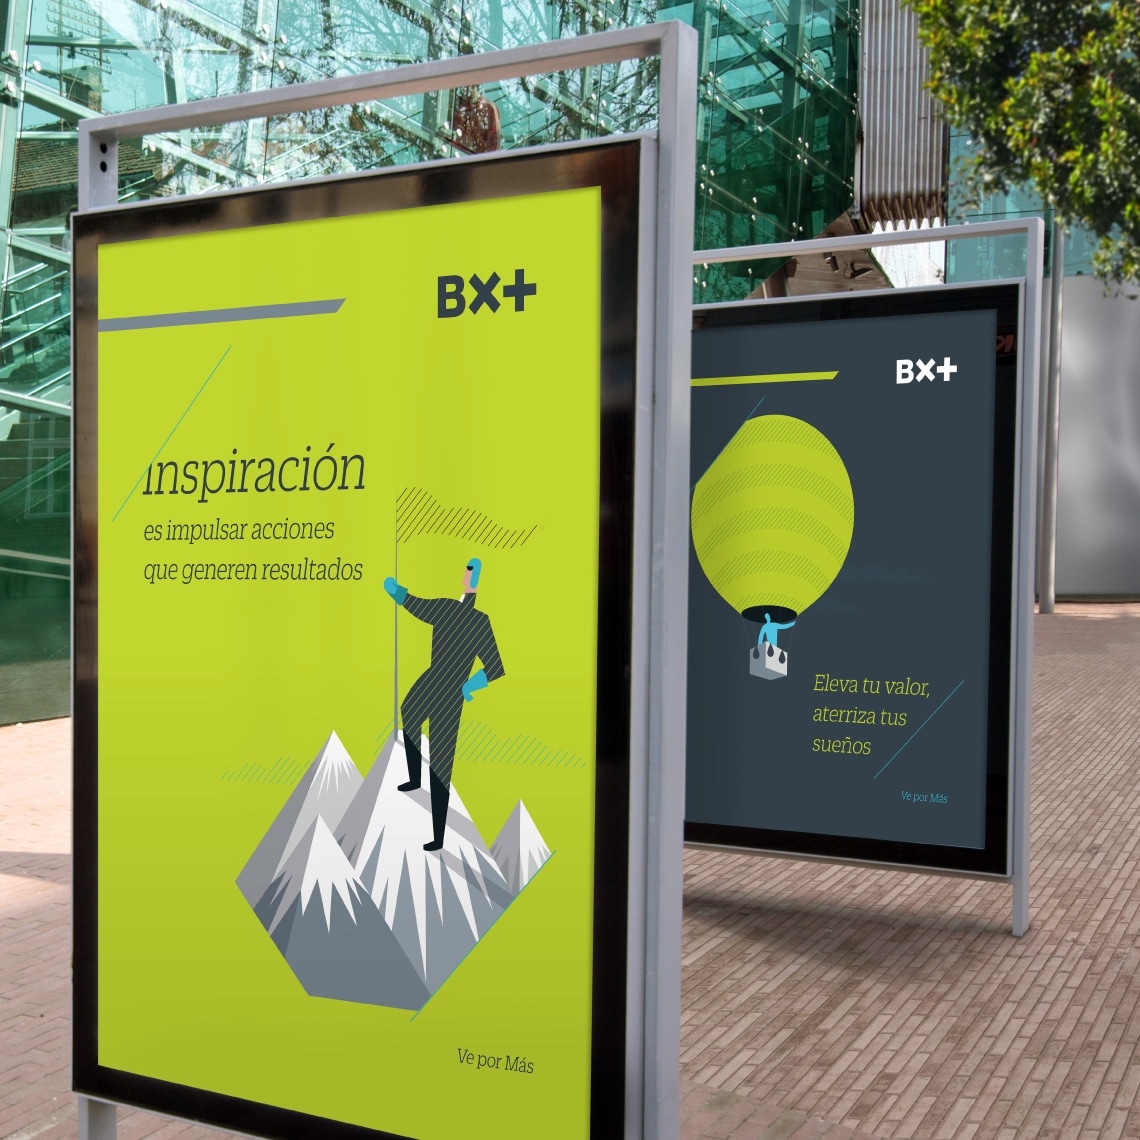 Example of two vertical banner showing how to apply the design identity for BX+